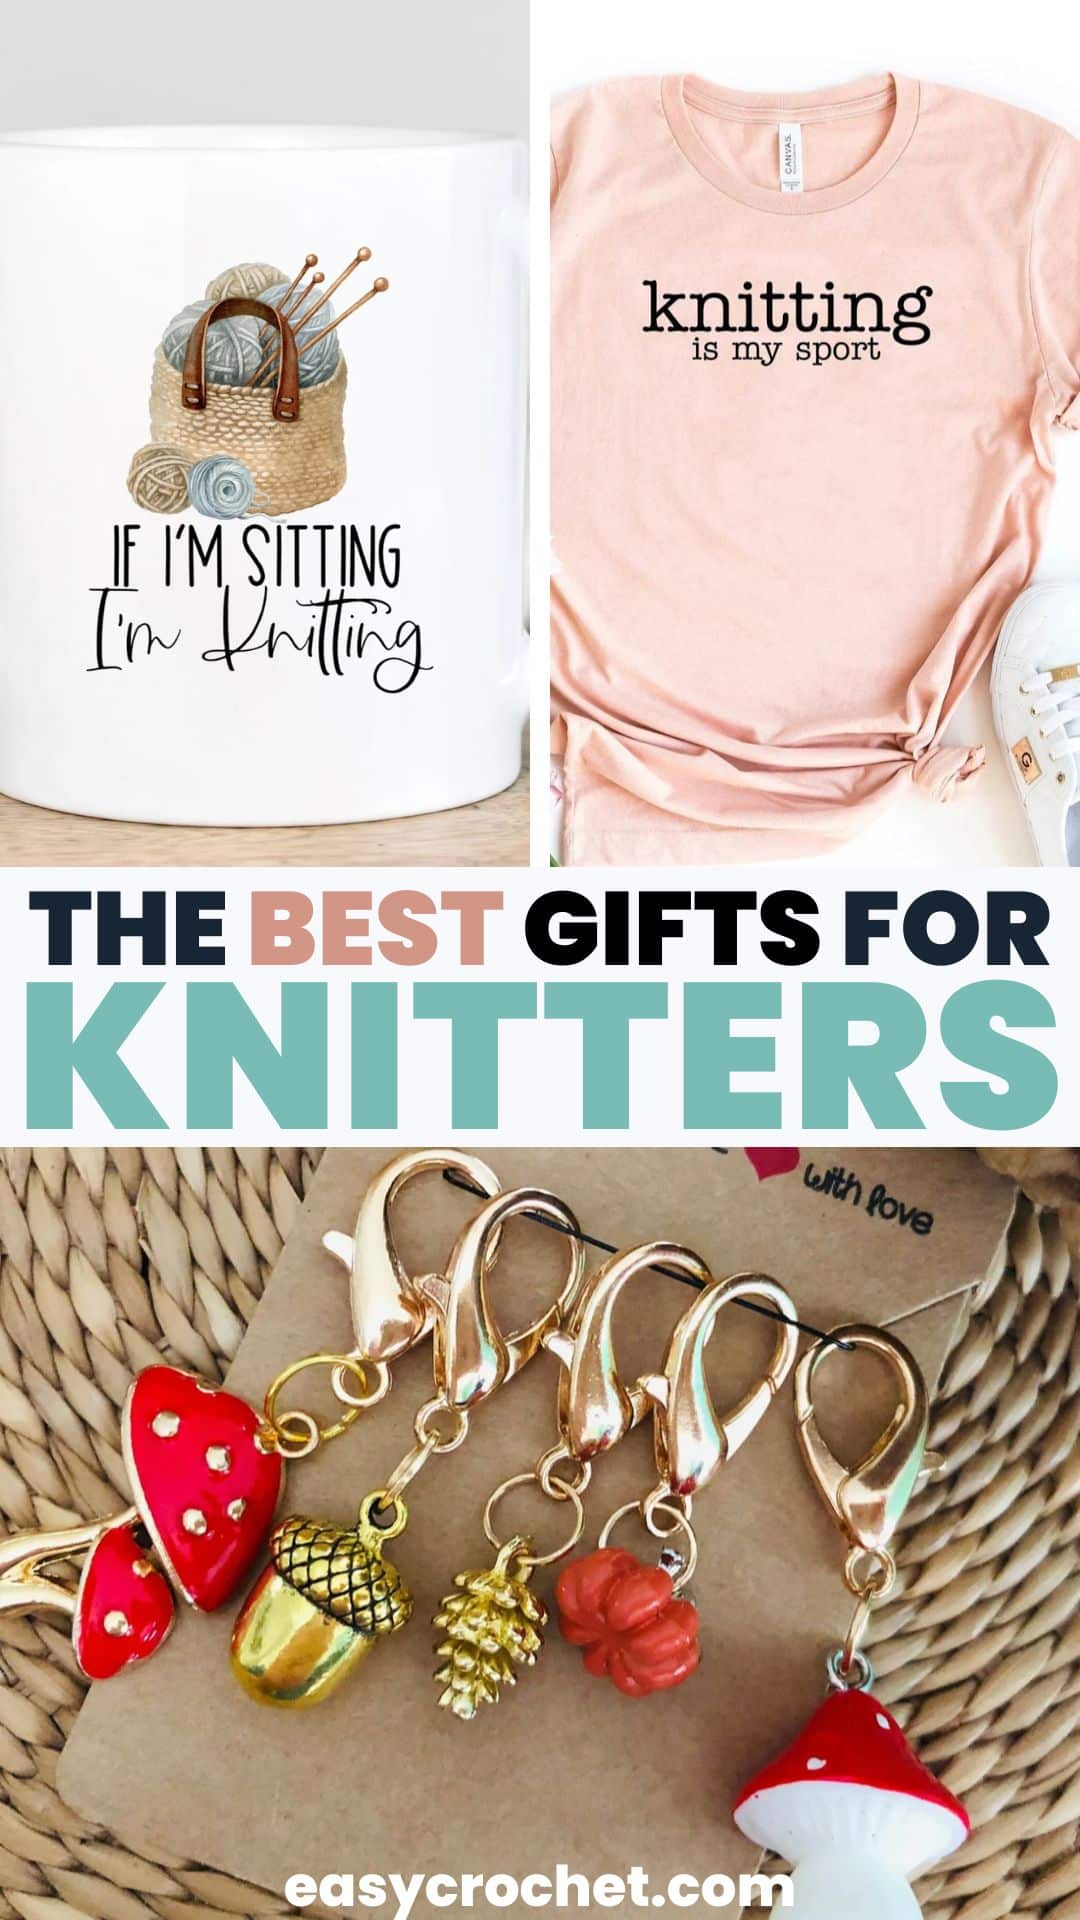 33 Excellent Gifts For Knitters That'll Have Them In Stitches Of Joy